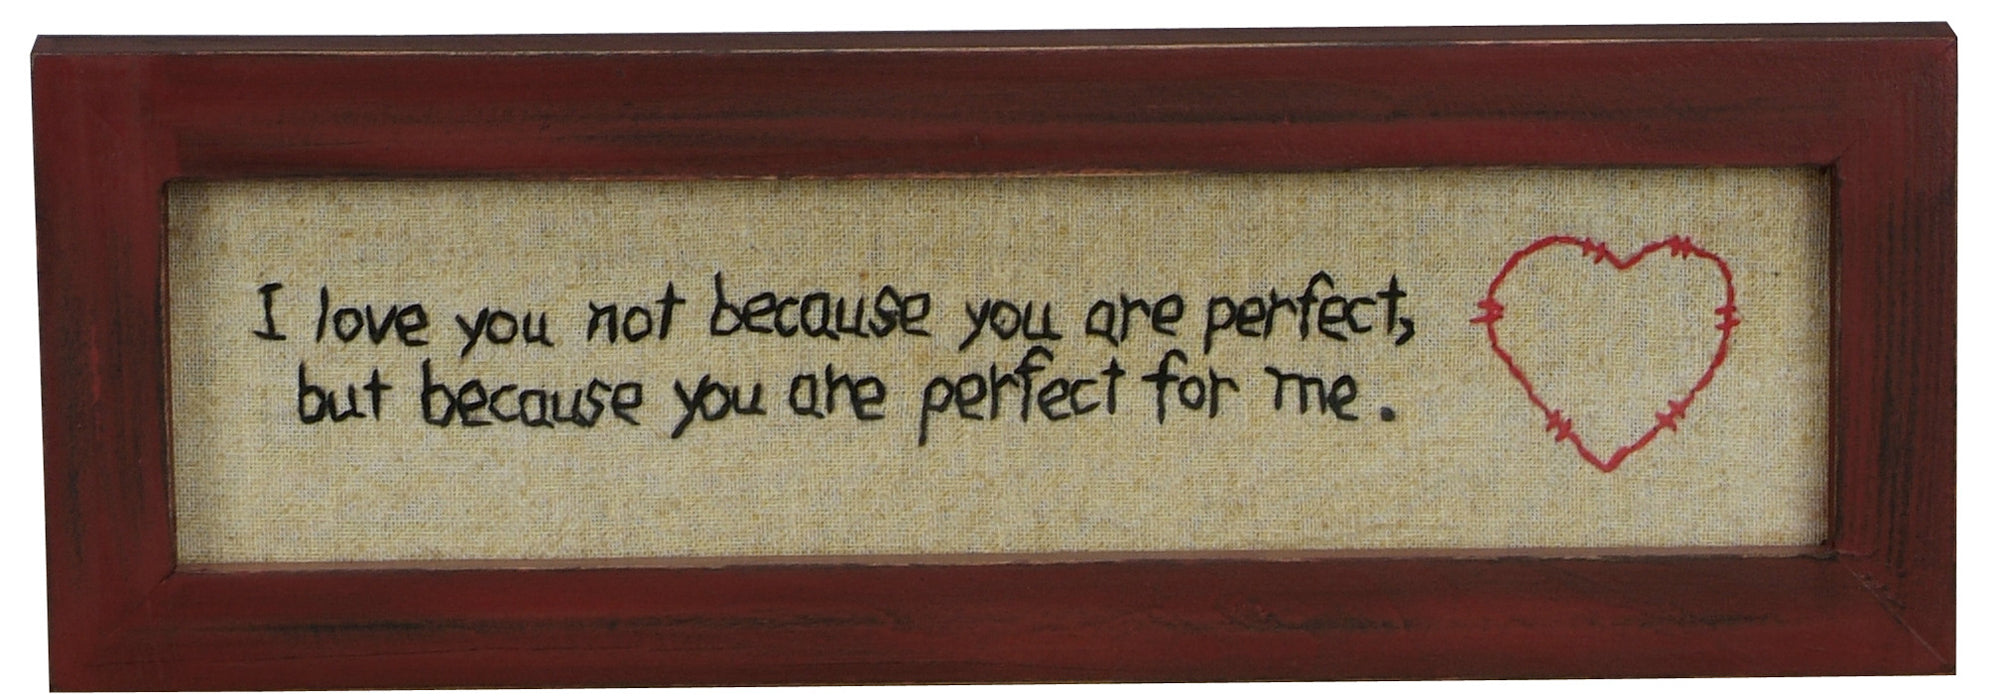 Stitcheries - I Love You Because You Are Perfect for Me